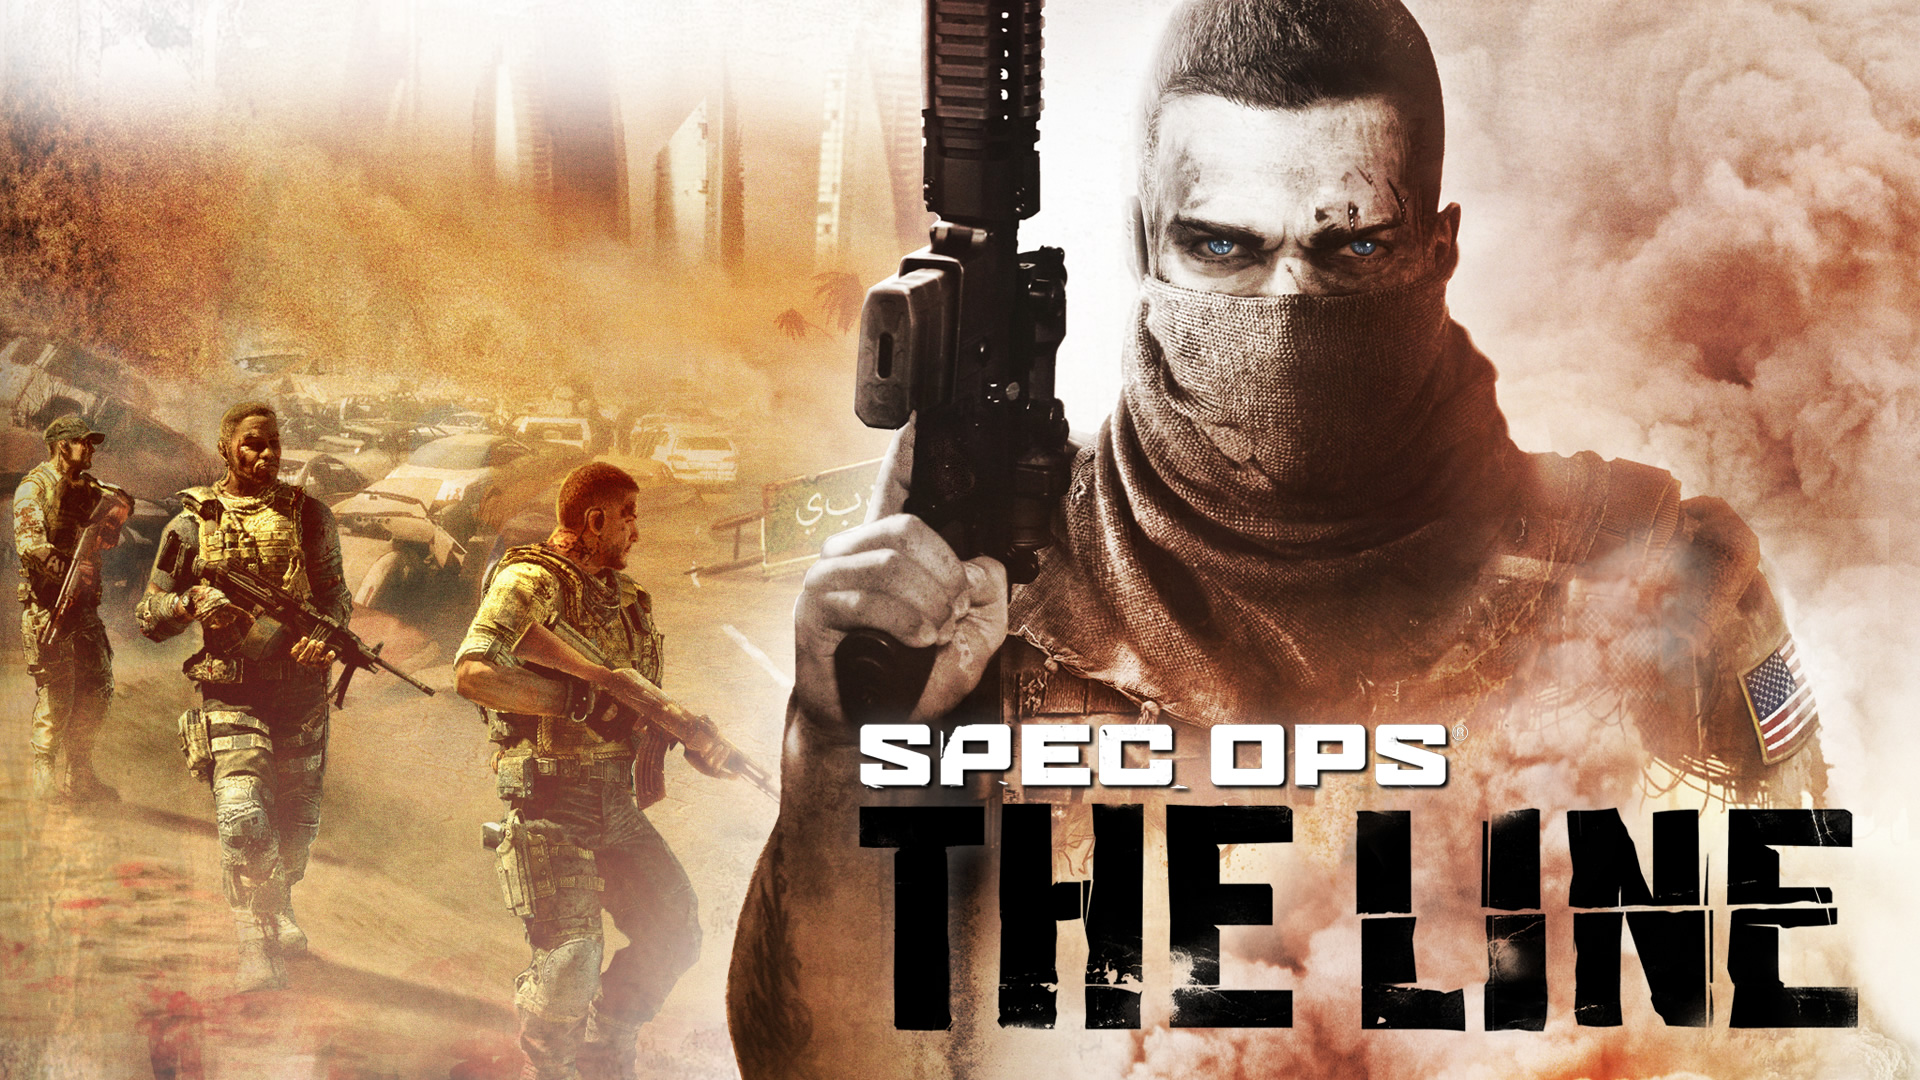 Spec ops the line crack pc